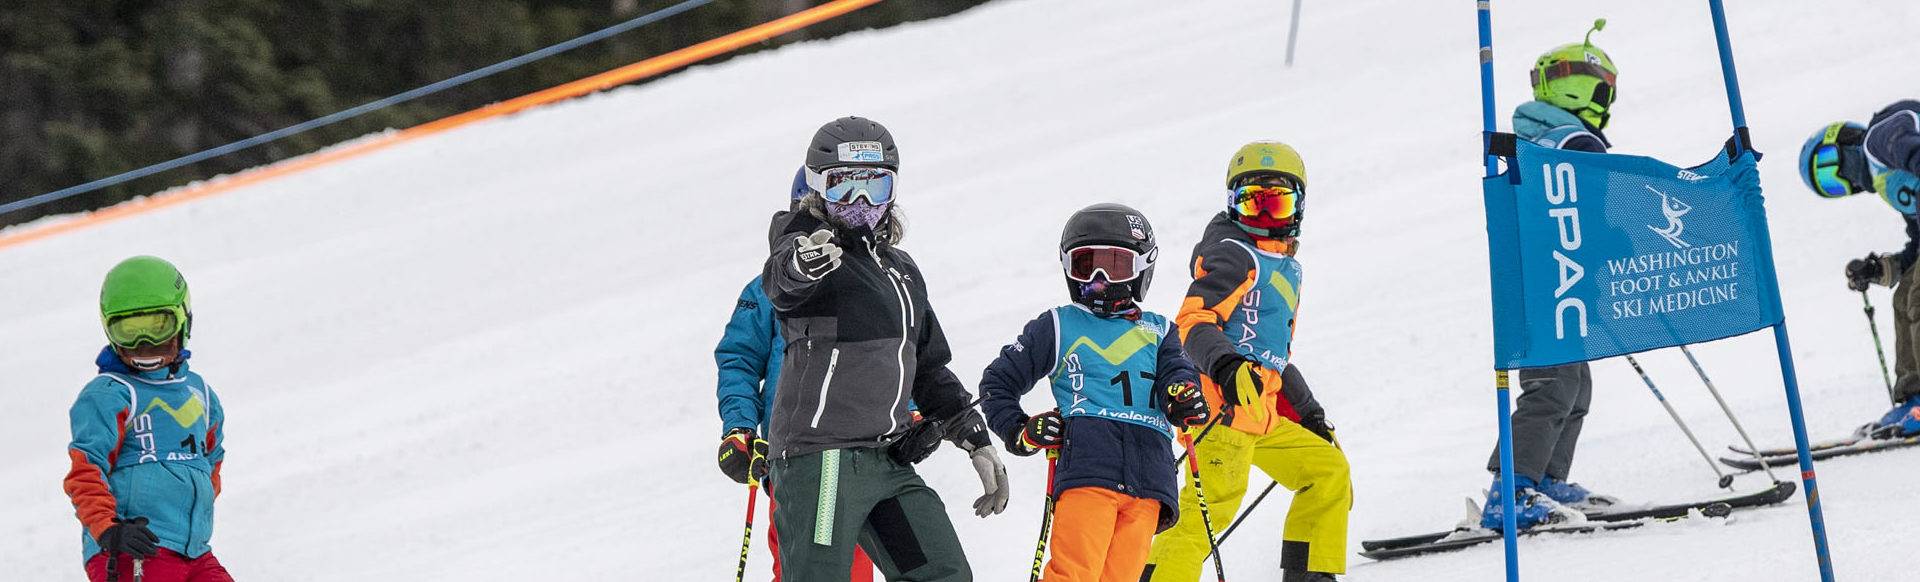 a coach directing children on a ski race course